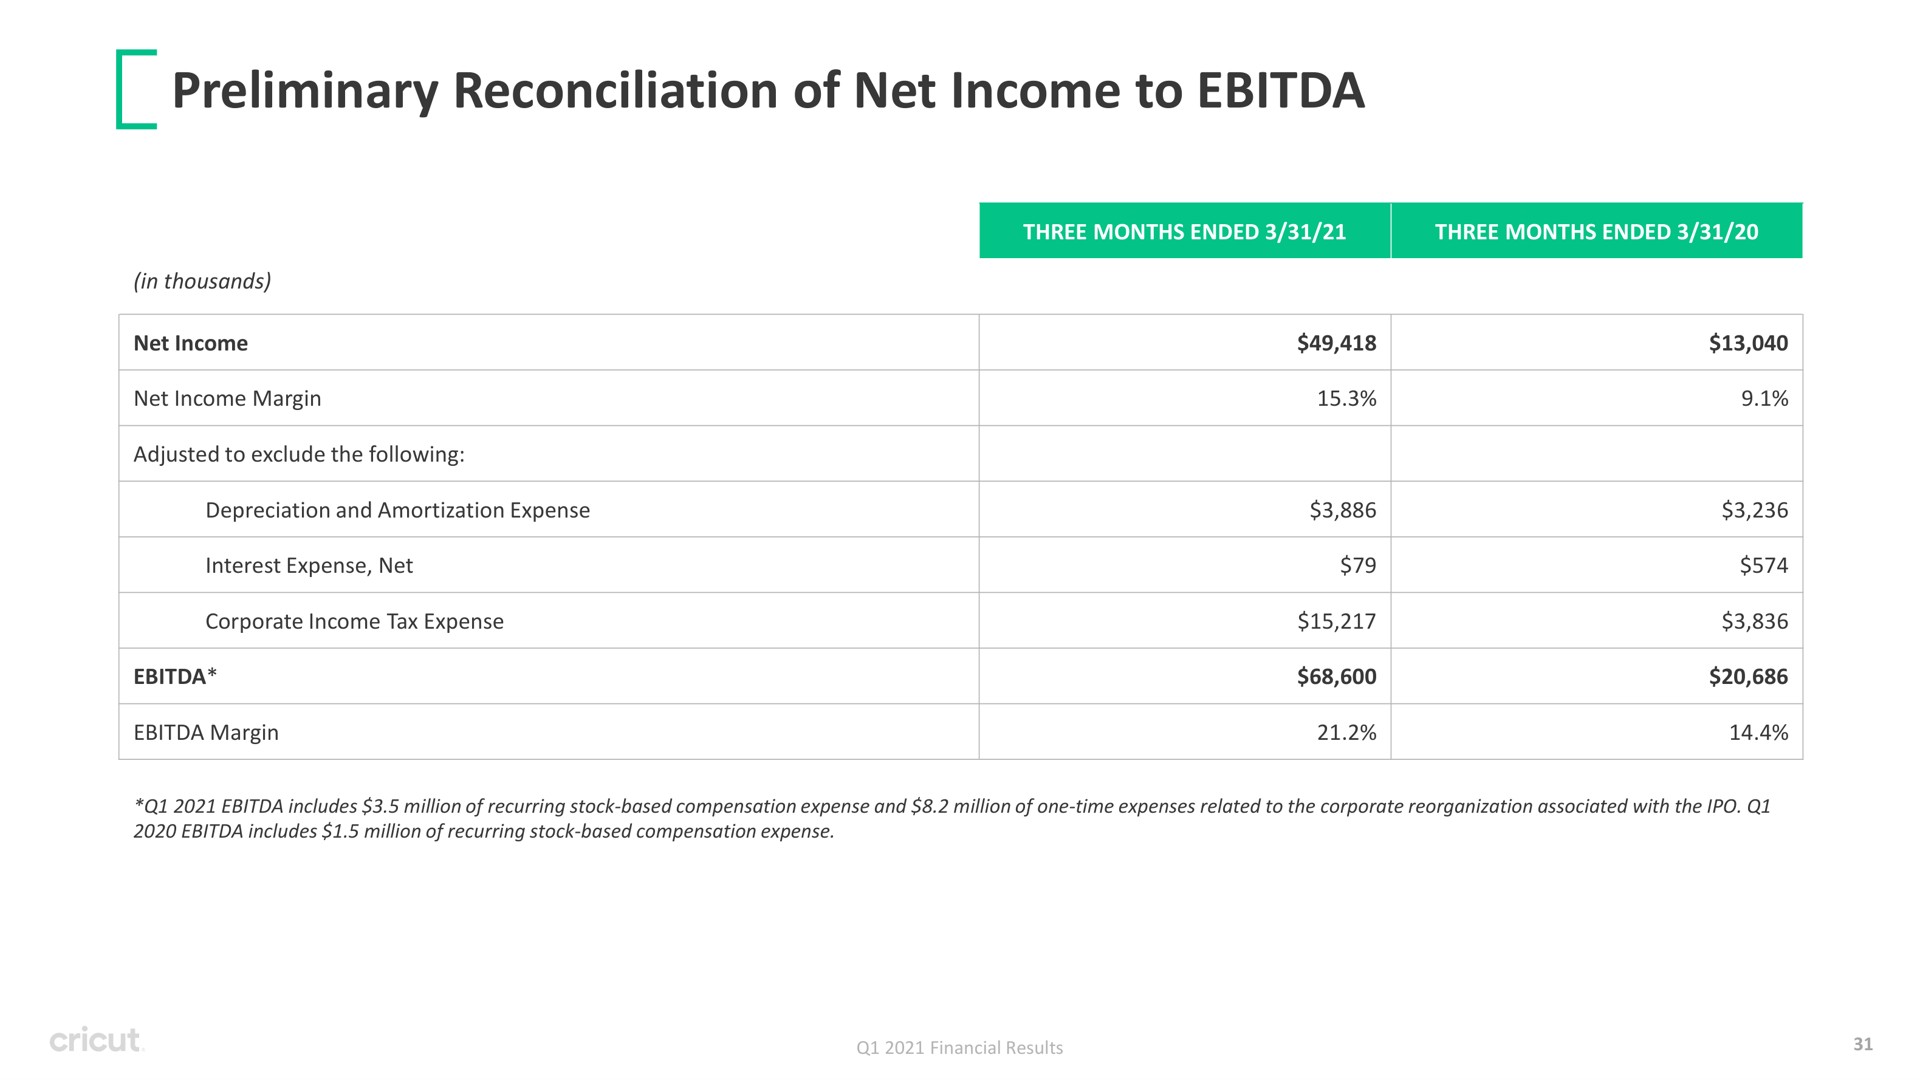 preliminary reconciliation of net income to i in thousands margin adjusted exclude the following depreciation and amortization expense interest expense corporate tax expense margin three months ended three months ended includes million recurring stock based compensation expense and million one time expenses related the corporate reorganization associated with the includes million recurring stock based compensation expense results | Circut